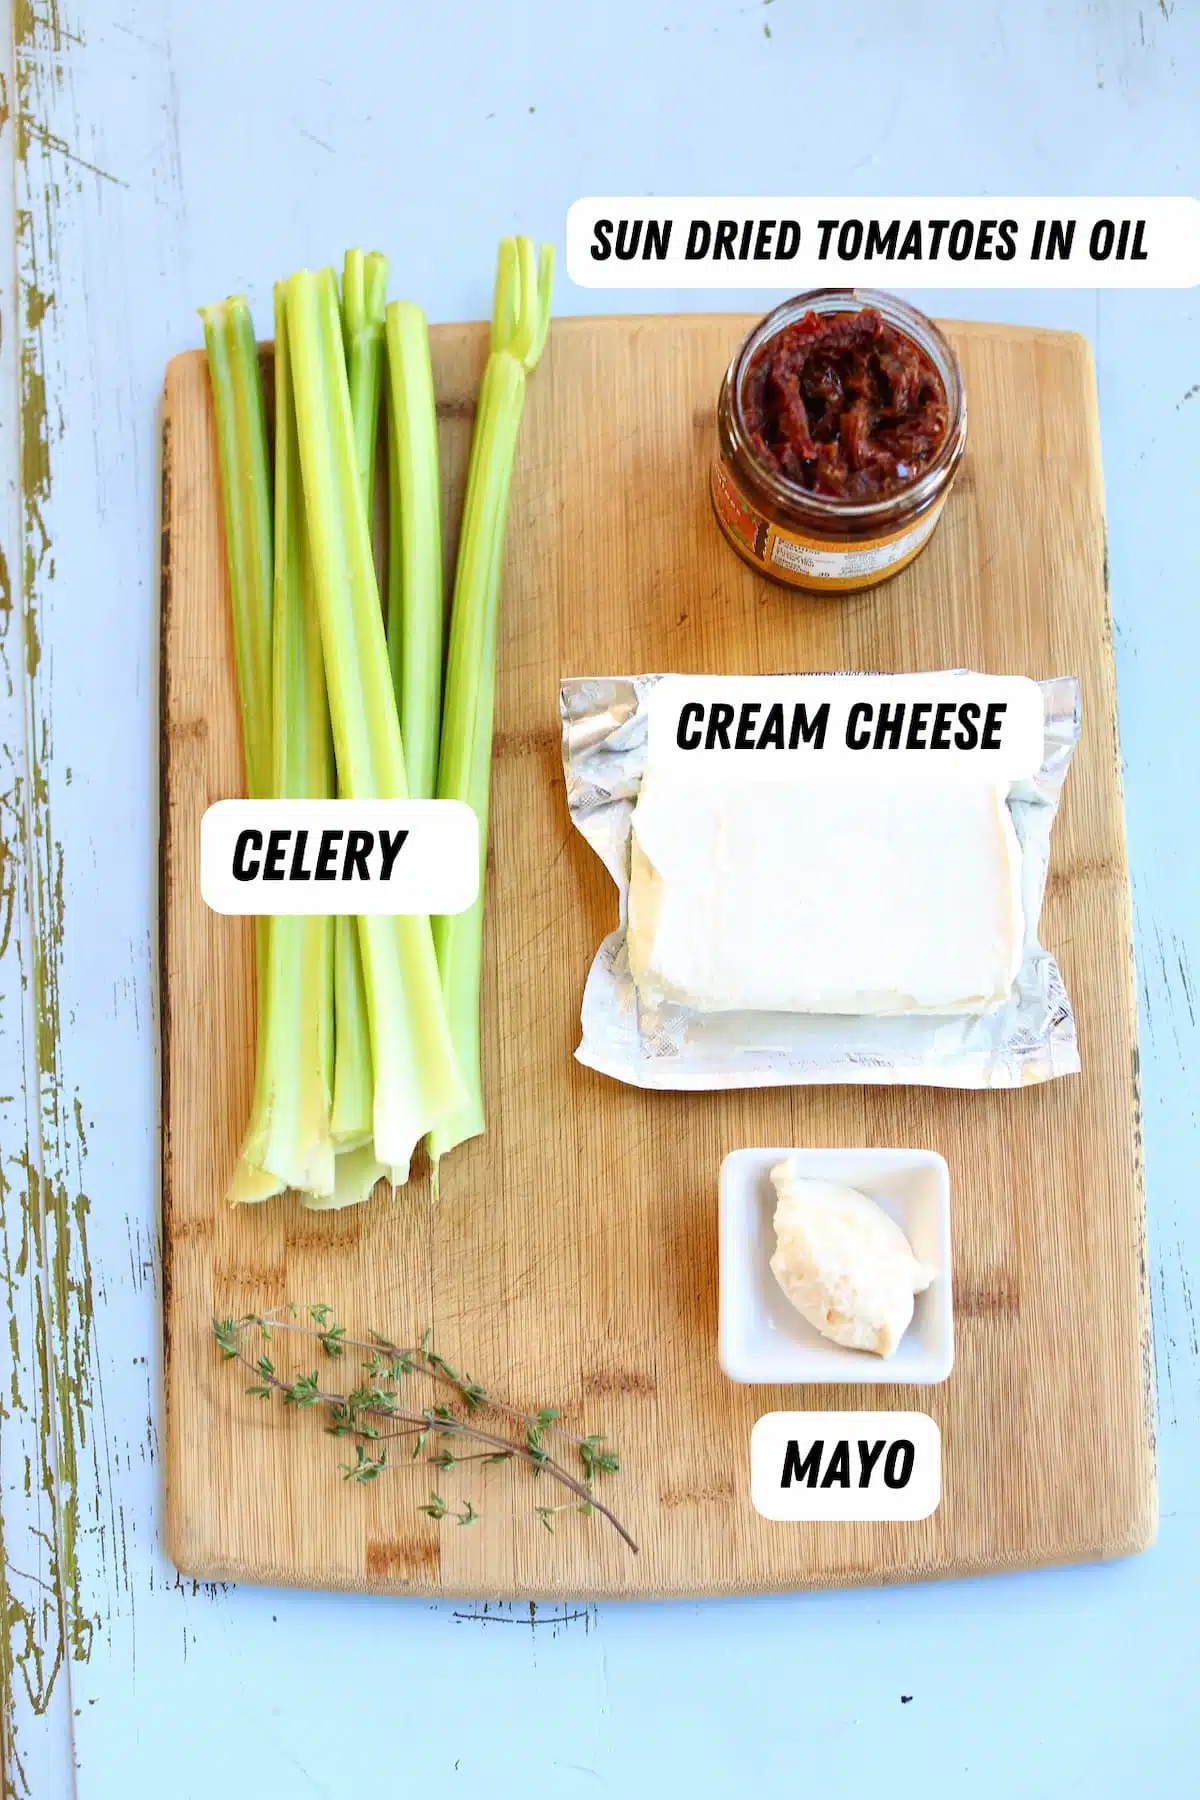 a cutting baord of ingredients for stuffed celery.